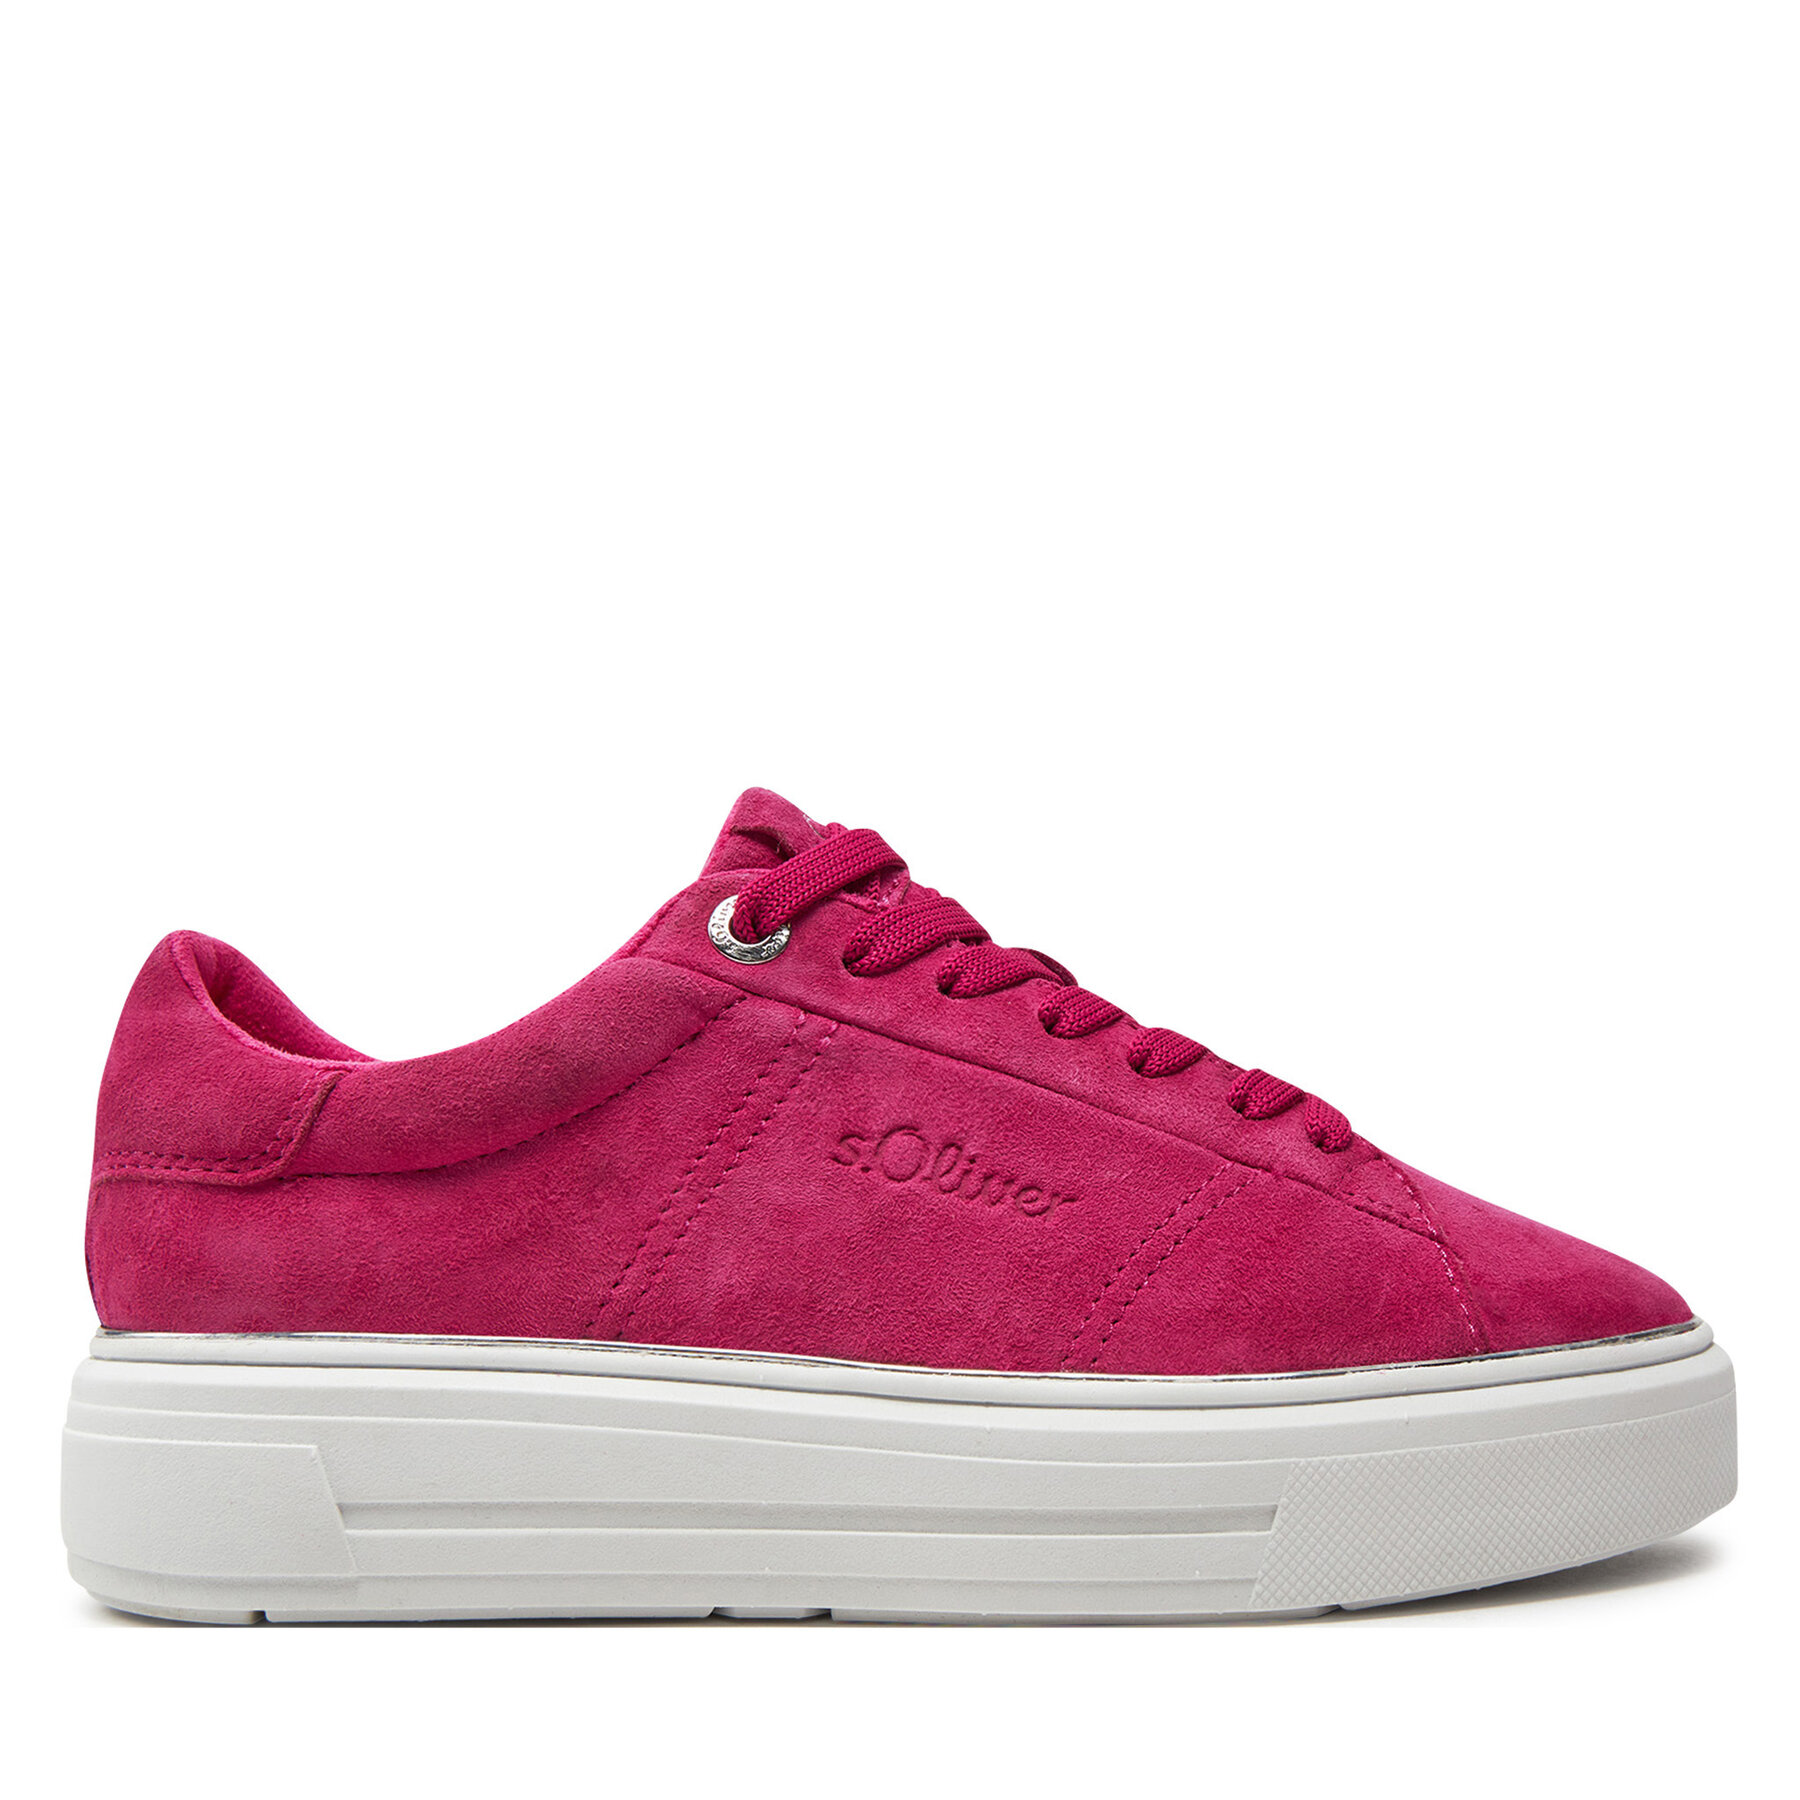 Sneakers s.Oliver 5-23636-42 Fuxia 532 von s.Oliver